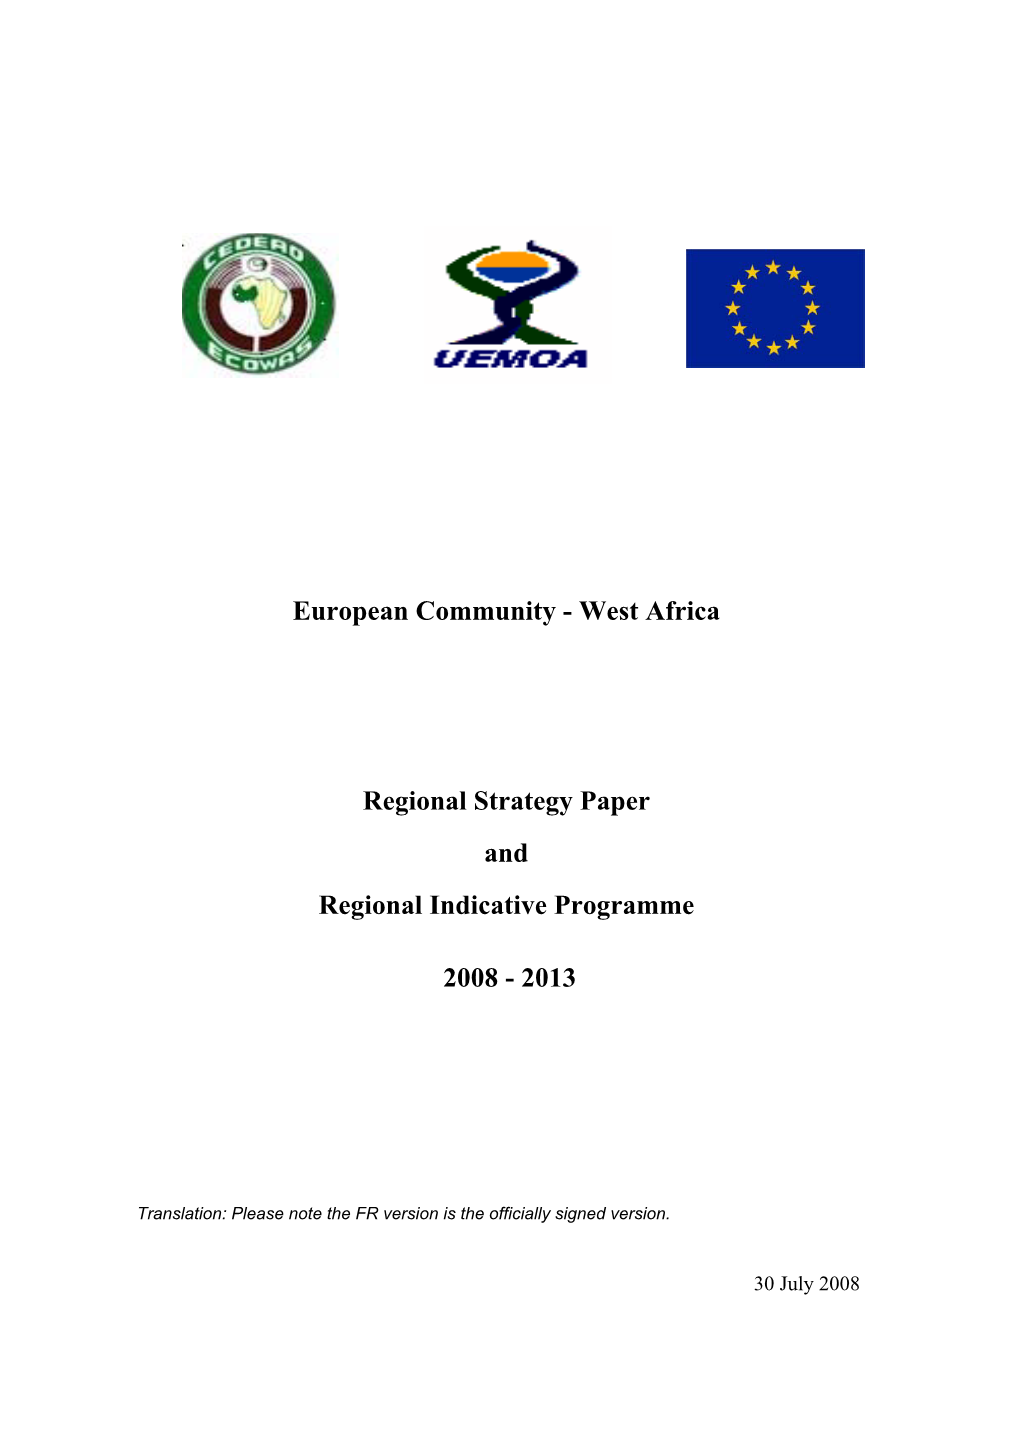 West Africa Regional Strategy Paper and Regional Indicative